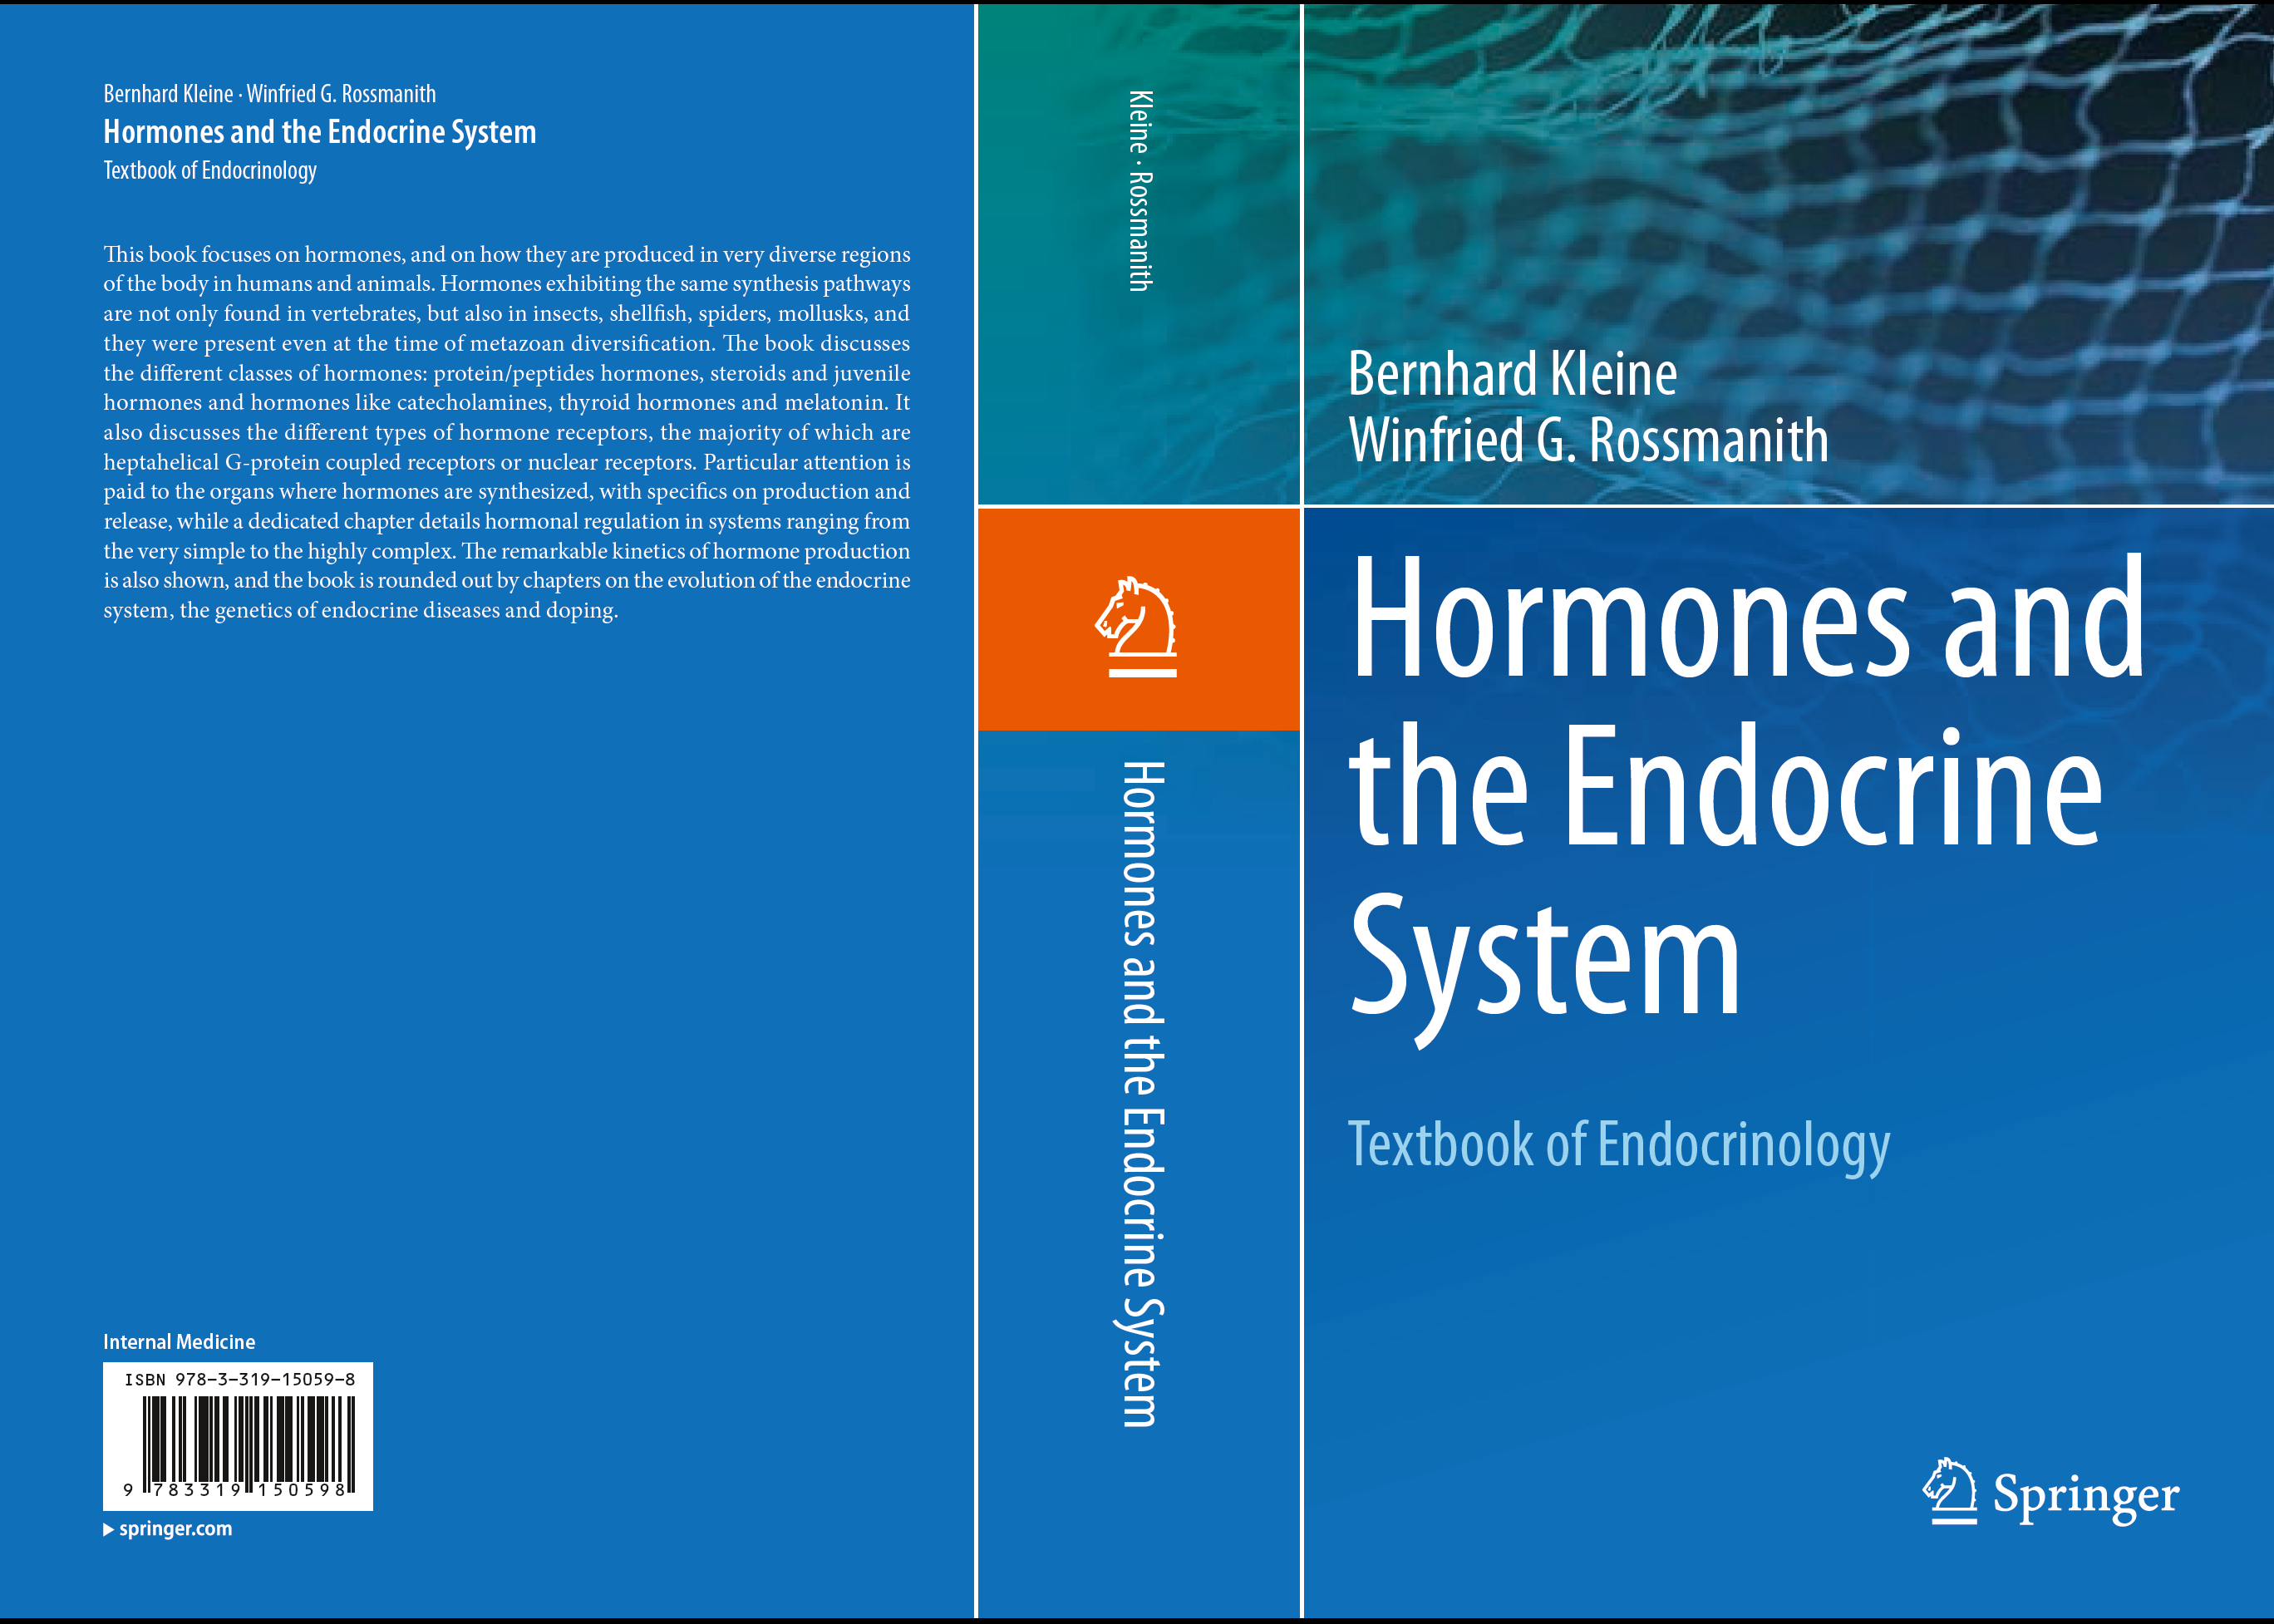 HOrmones and the Endocrines System